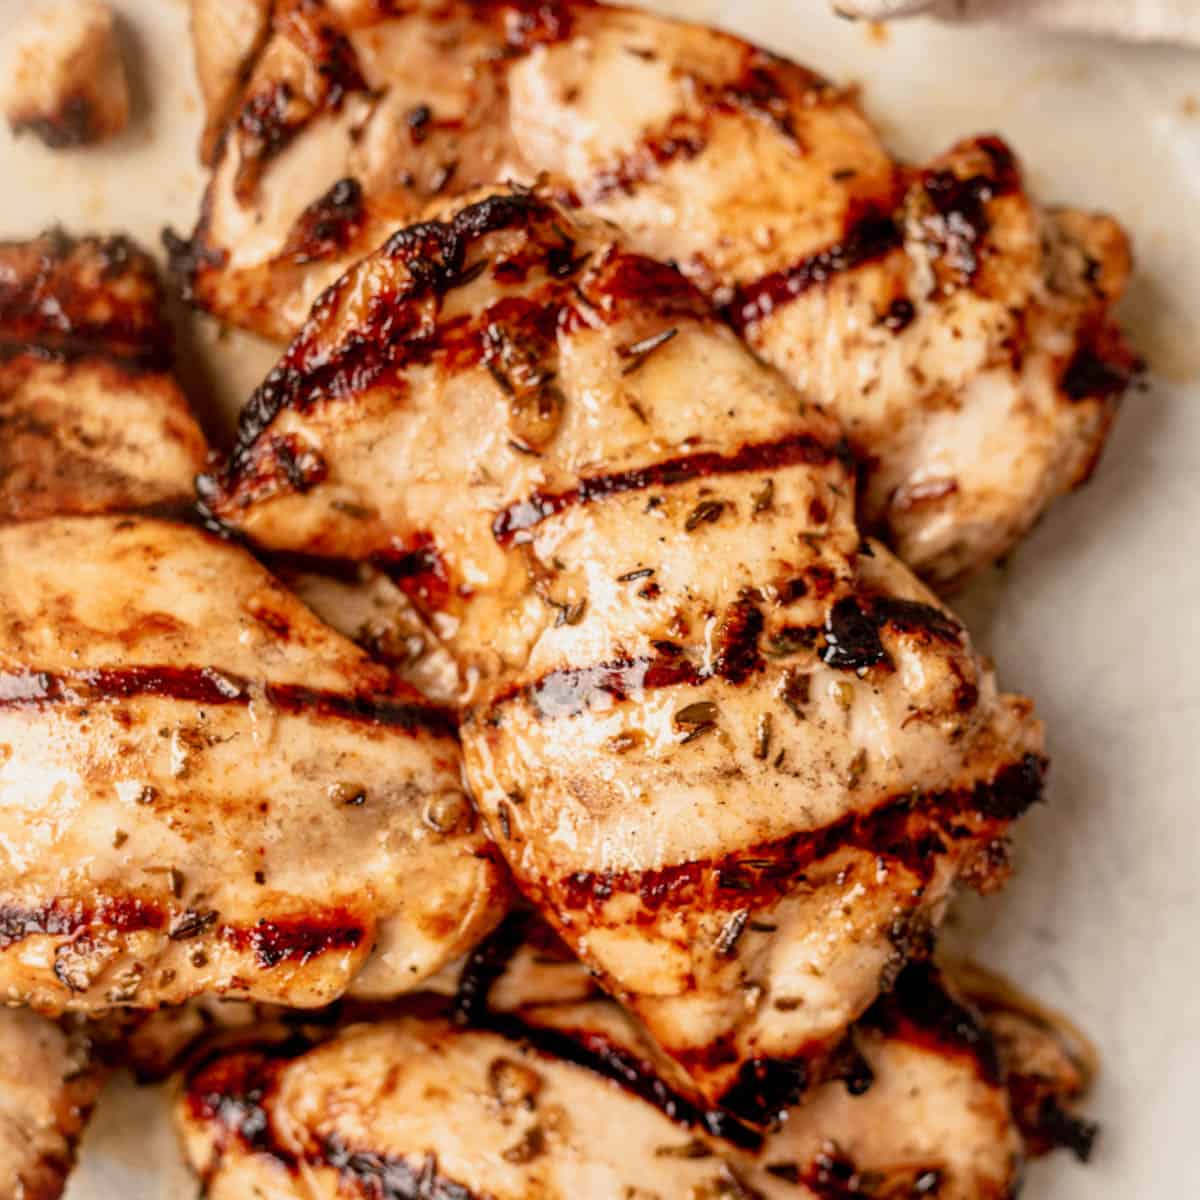 Grilled Chicken Breasts - Easy Grill Pan Method - A Pinch of Healthy